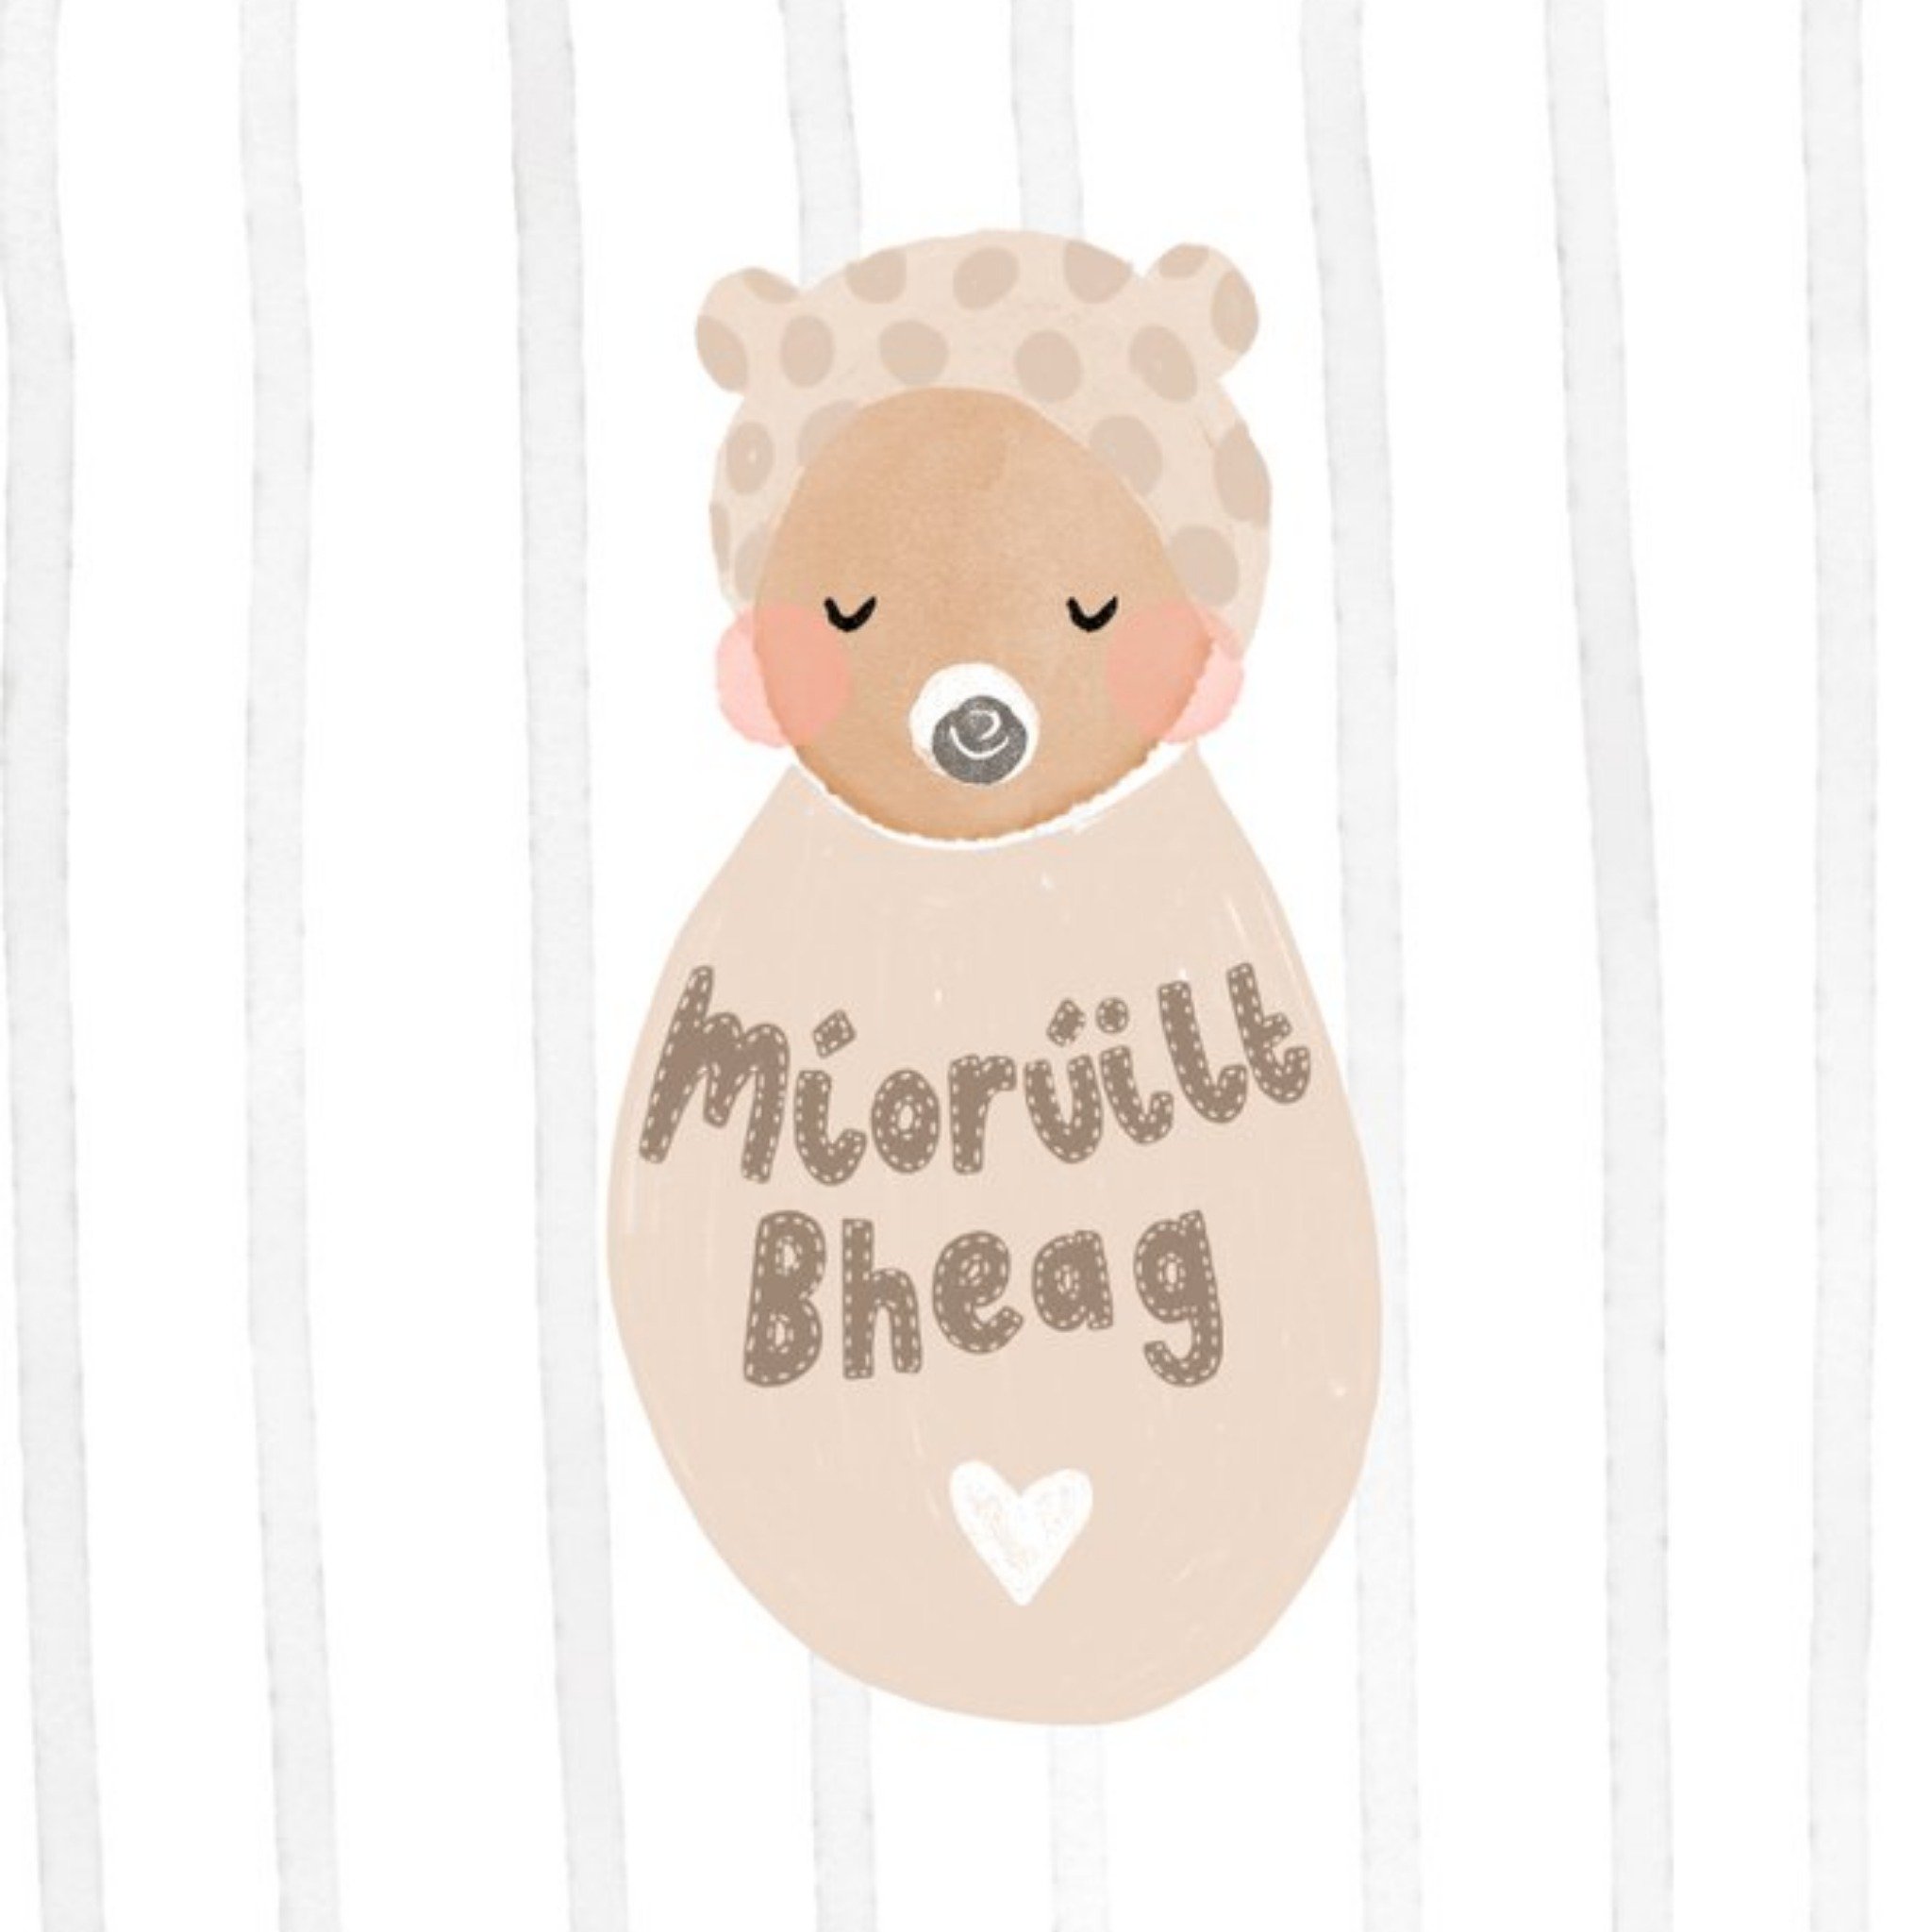 Moonpig Cute Illustrated Baby New Baby Card, Large